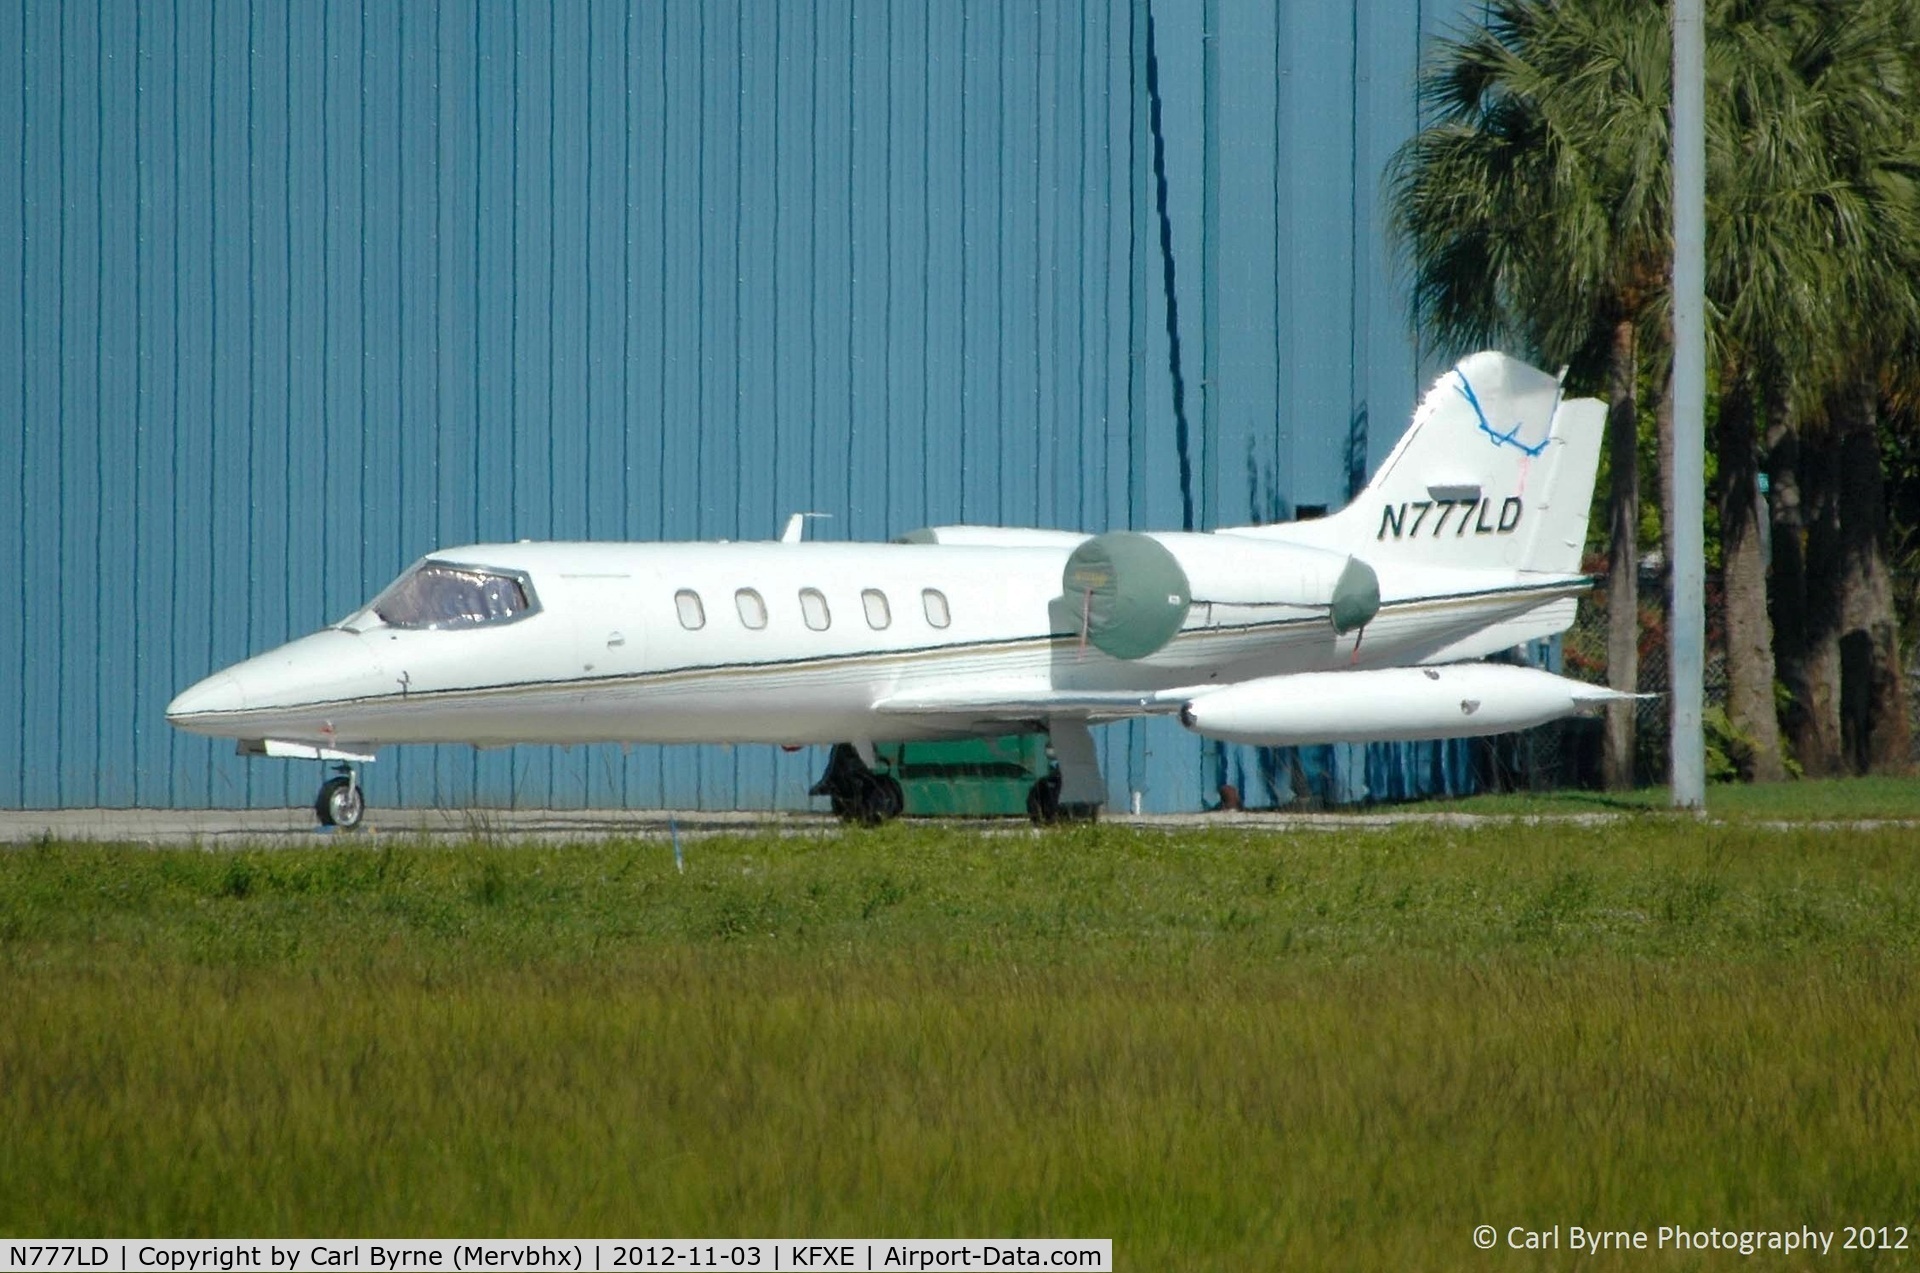 N777LD, 1980 Gates Learjet Corp. 35A C/N 314, Taken from the covered viewing area.